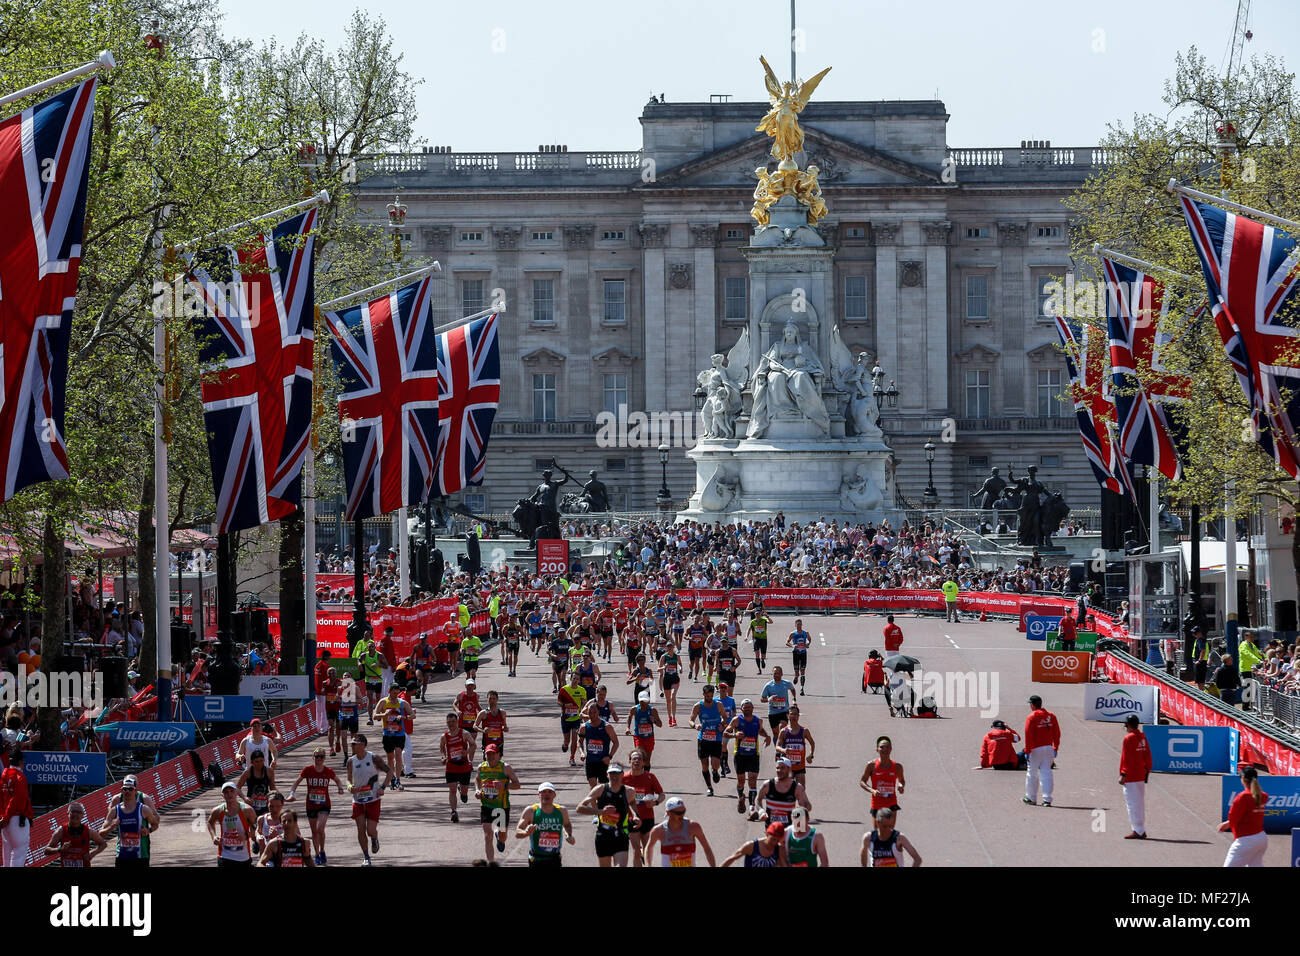 Mass Race runners approach the finish at The Mall in front of Buckingham Palace during the Virgin Money London Marathon in London, England on April 22, 2018. 41 thousand people participated in the marathon. Stock Photo